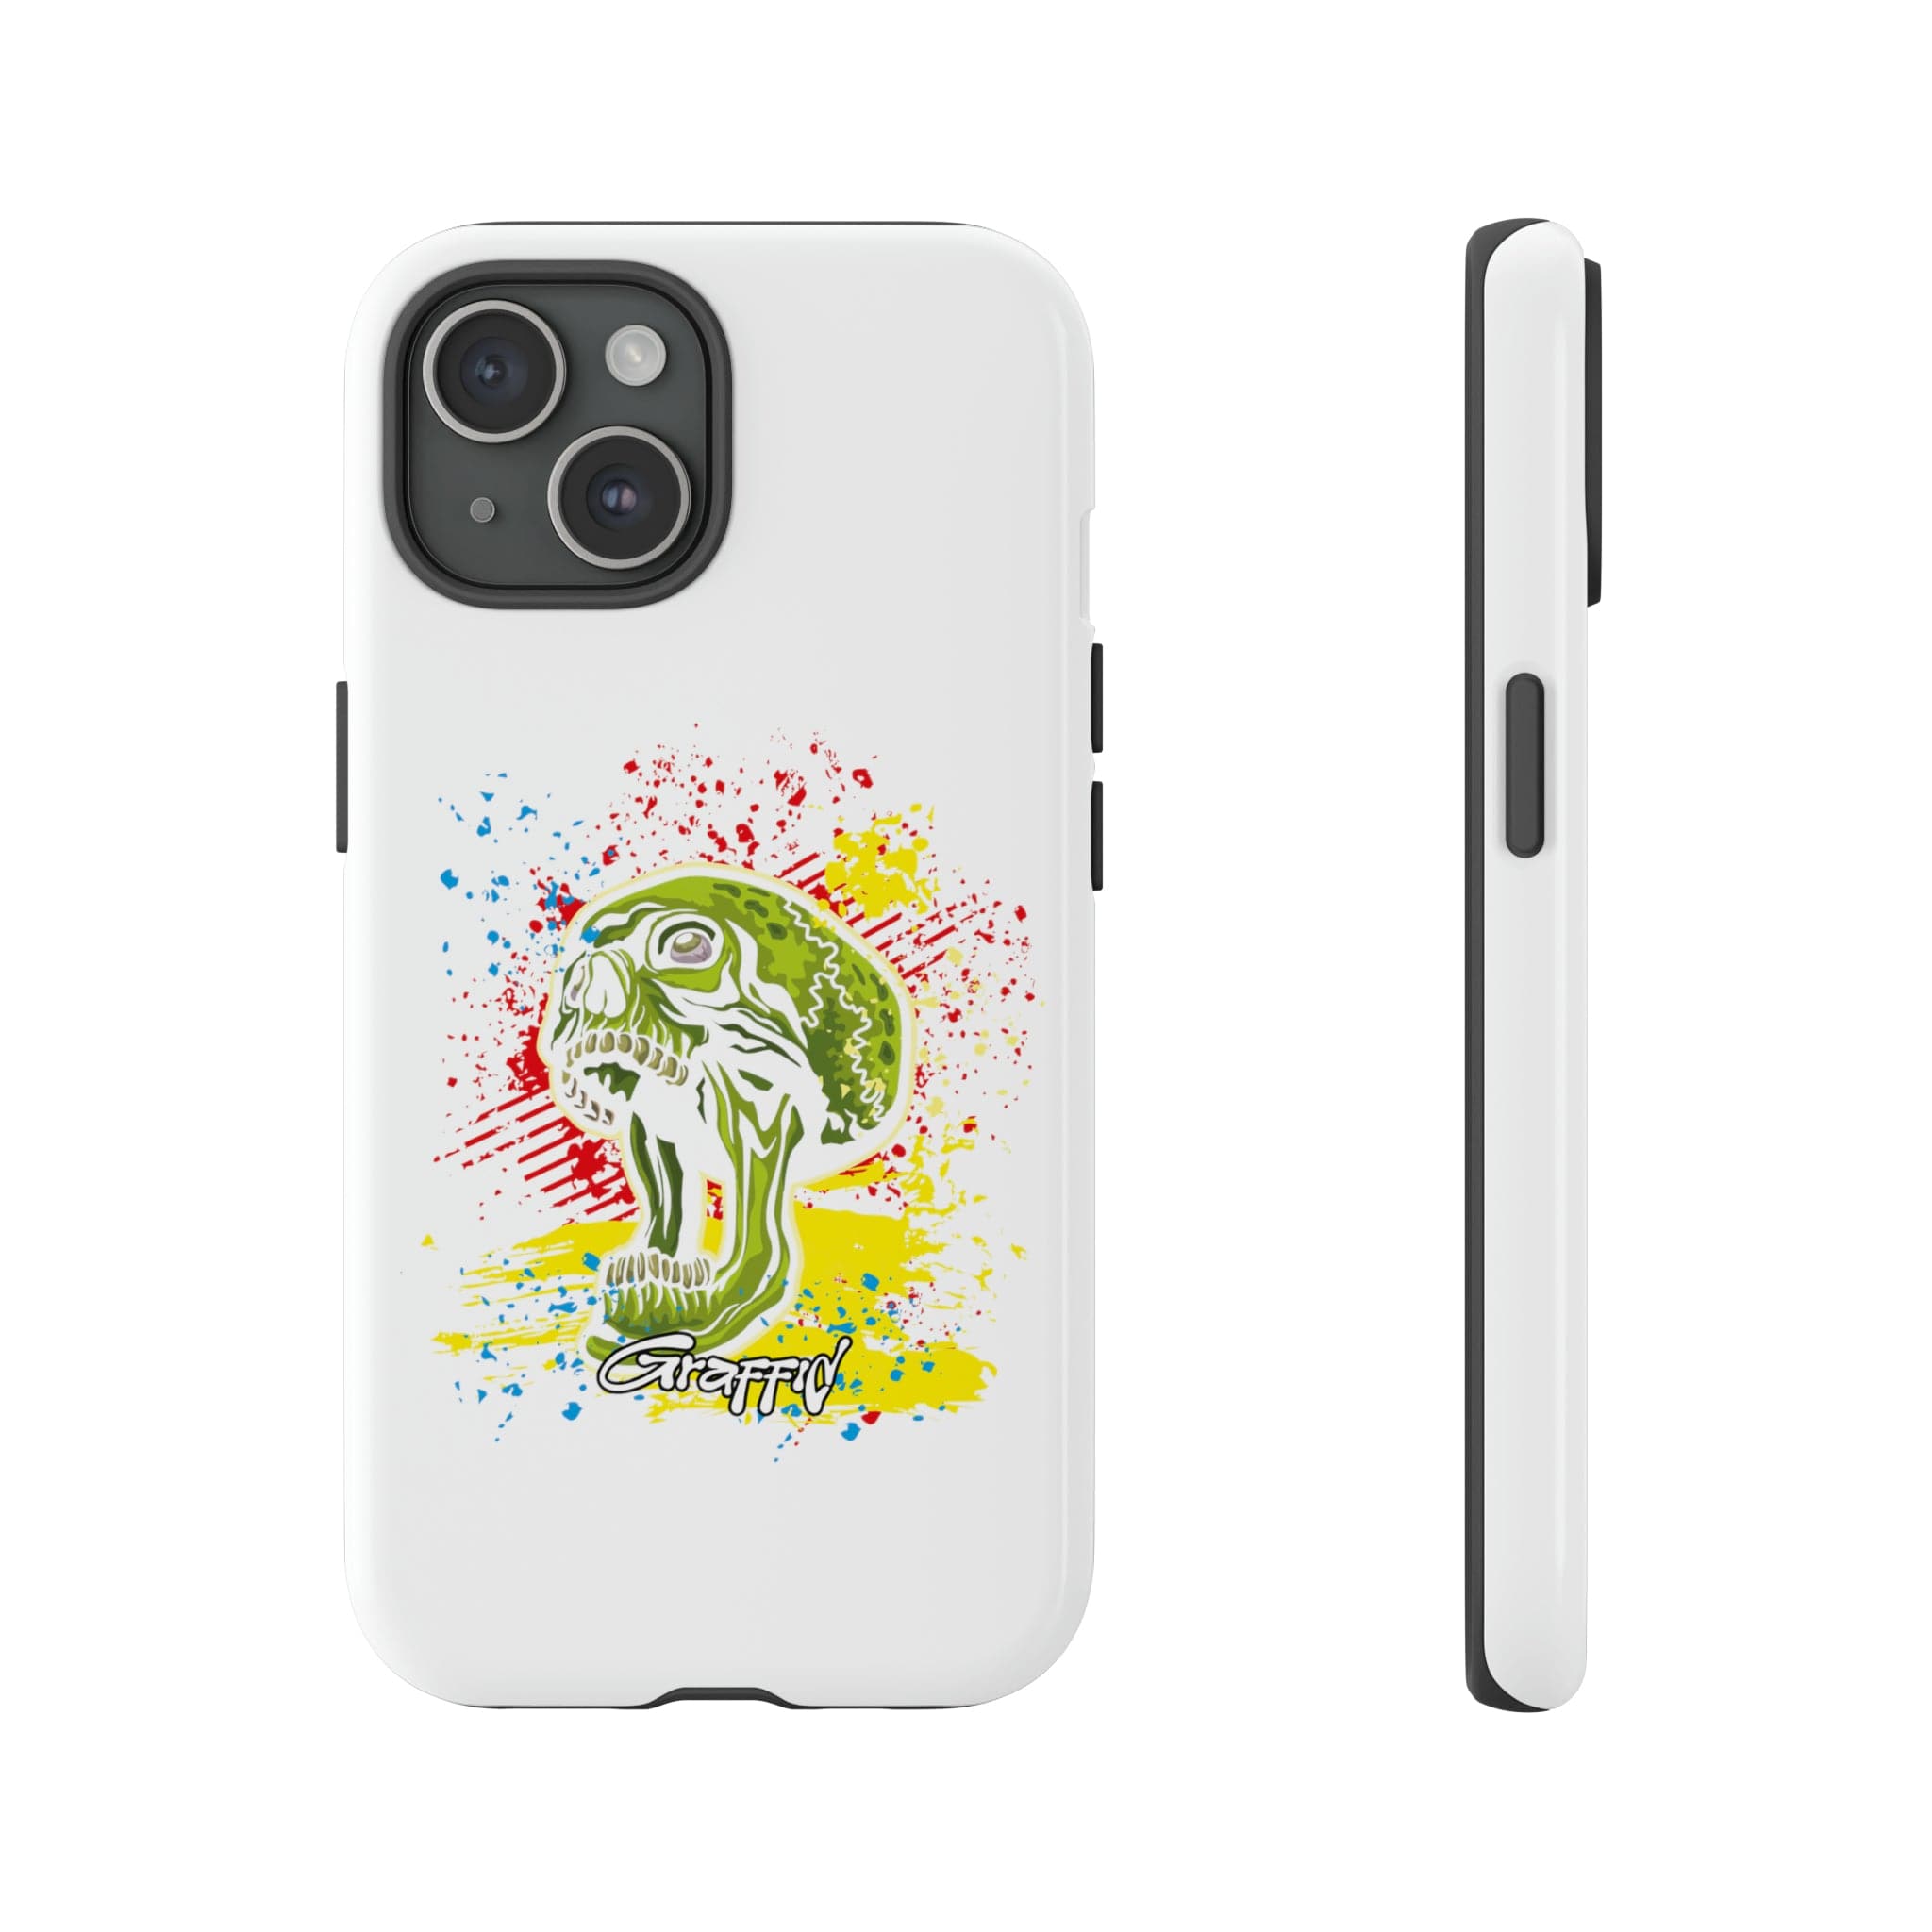 Skully Scribble | Phone Cases